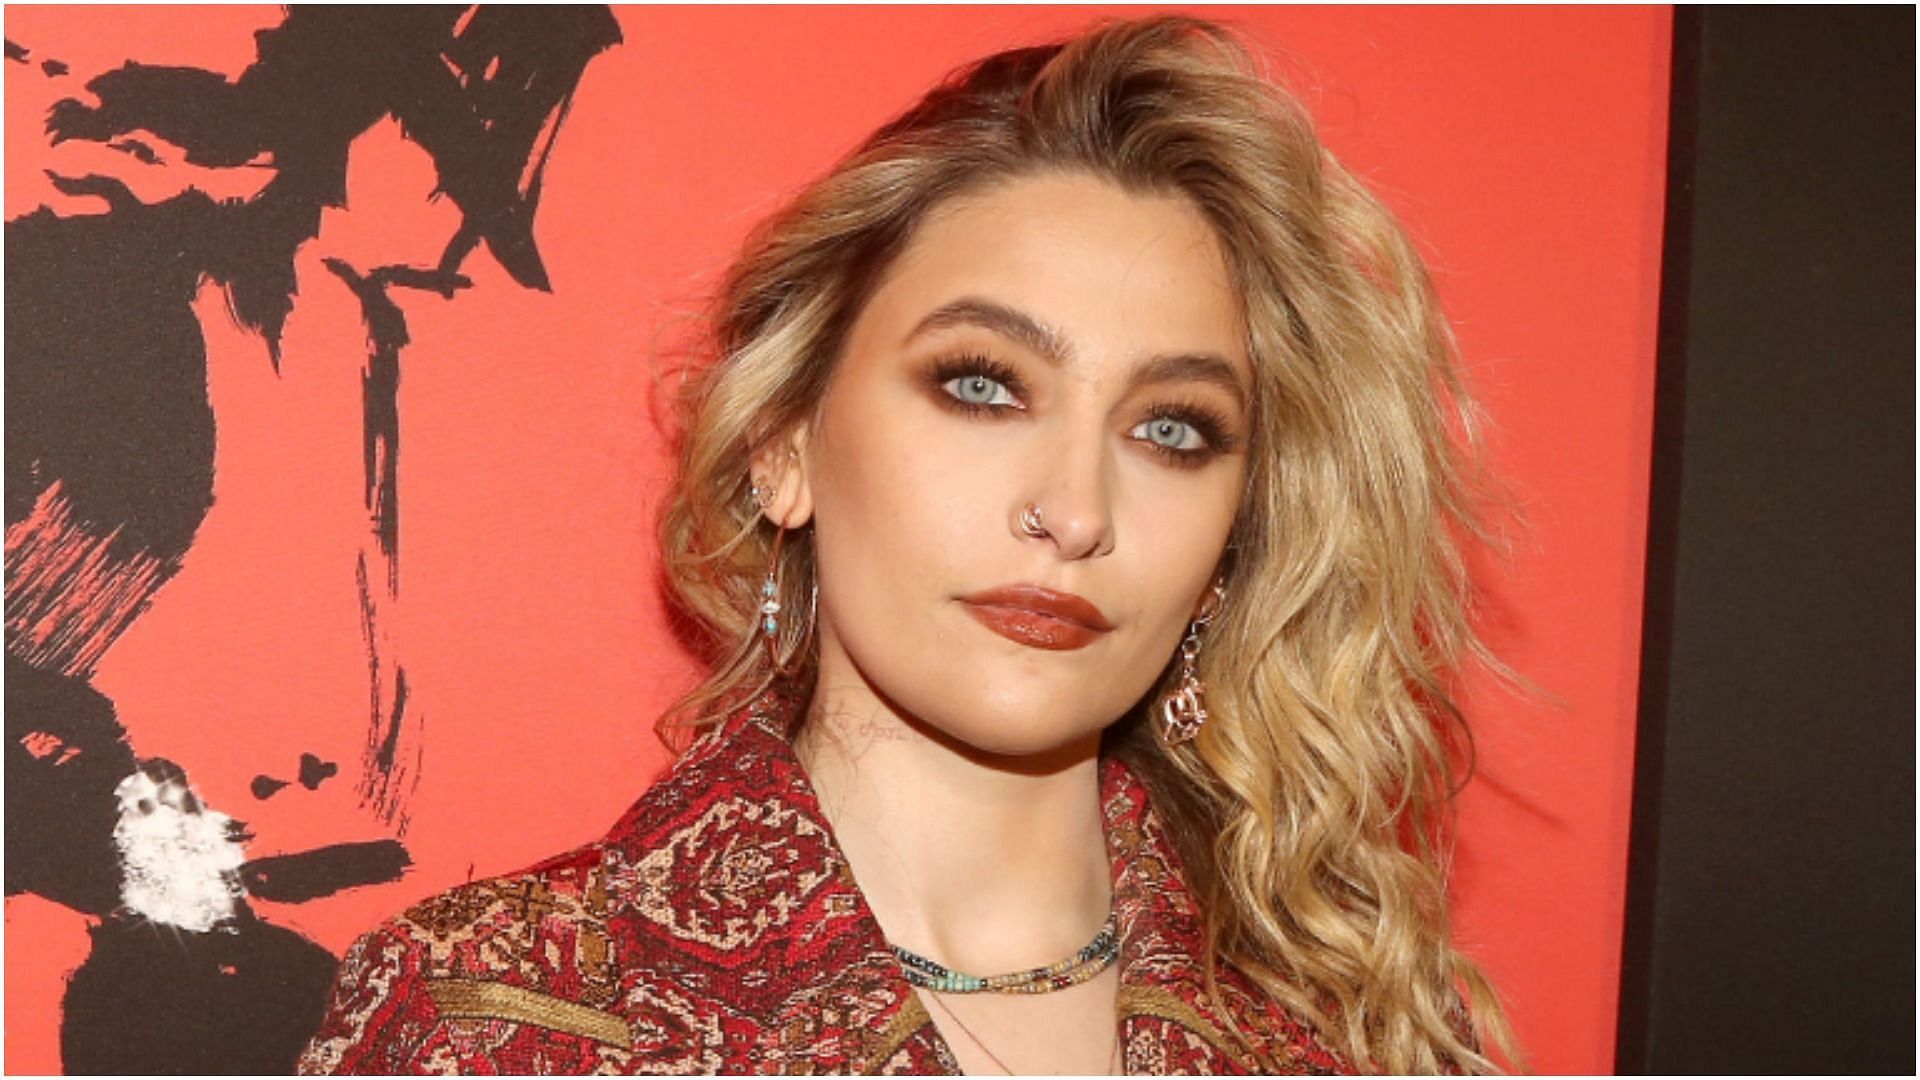 Paris Jackson has appeared in various movies and TV shows (Image via Getty Images/Bruce Glikas)